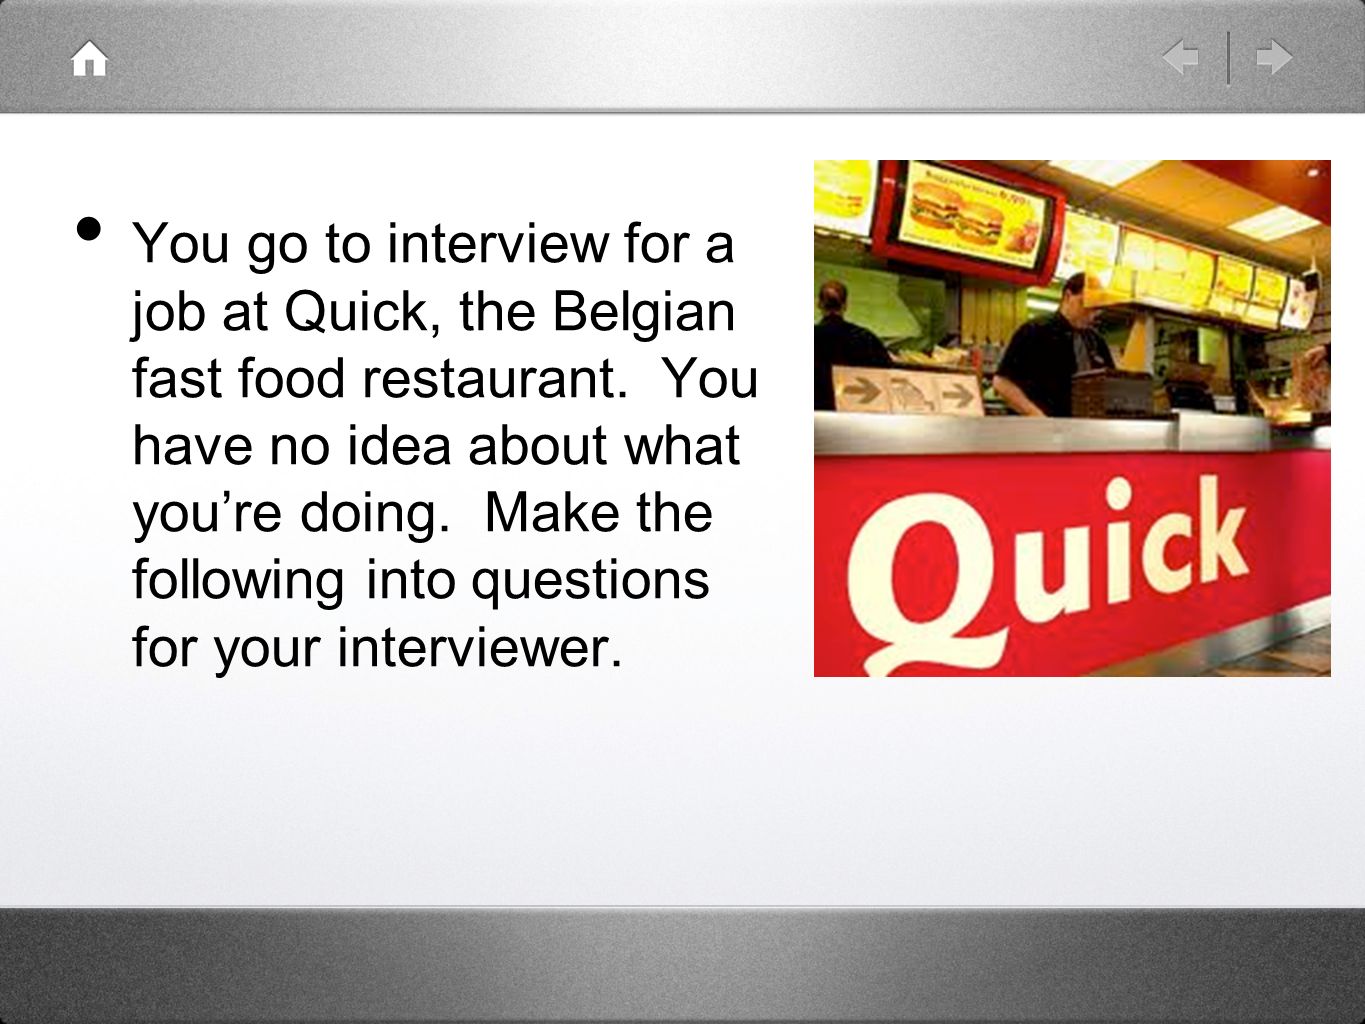 You go to interview for a job at Quick, the Belgian fast food restaurant.